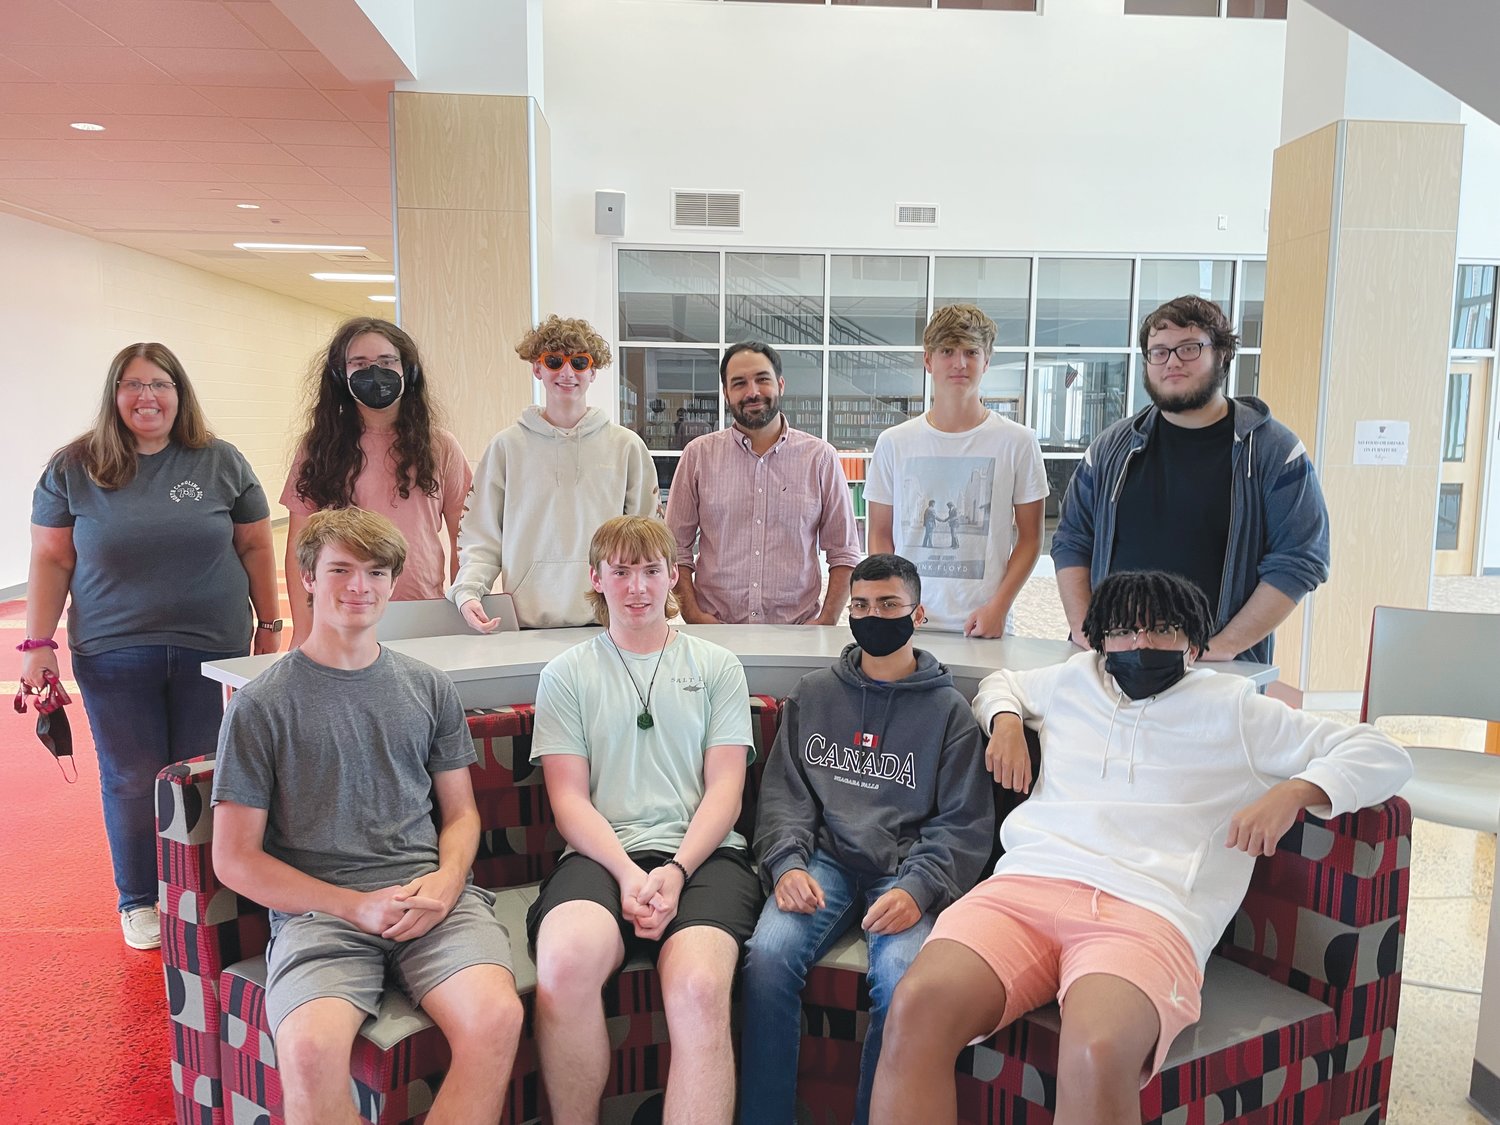 Eight Chatham County Schools students were part of the first Summer Tech Team, hosted at Seaforth High School. The program was mentored by Bobbie Roberston (upper left) and Alex Trujillo (upper center).